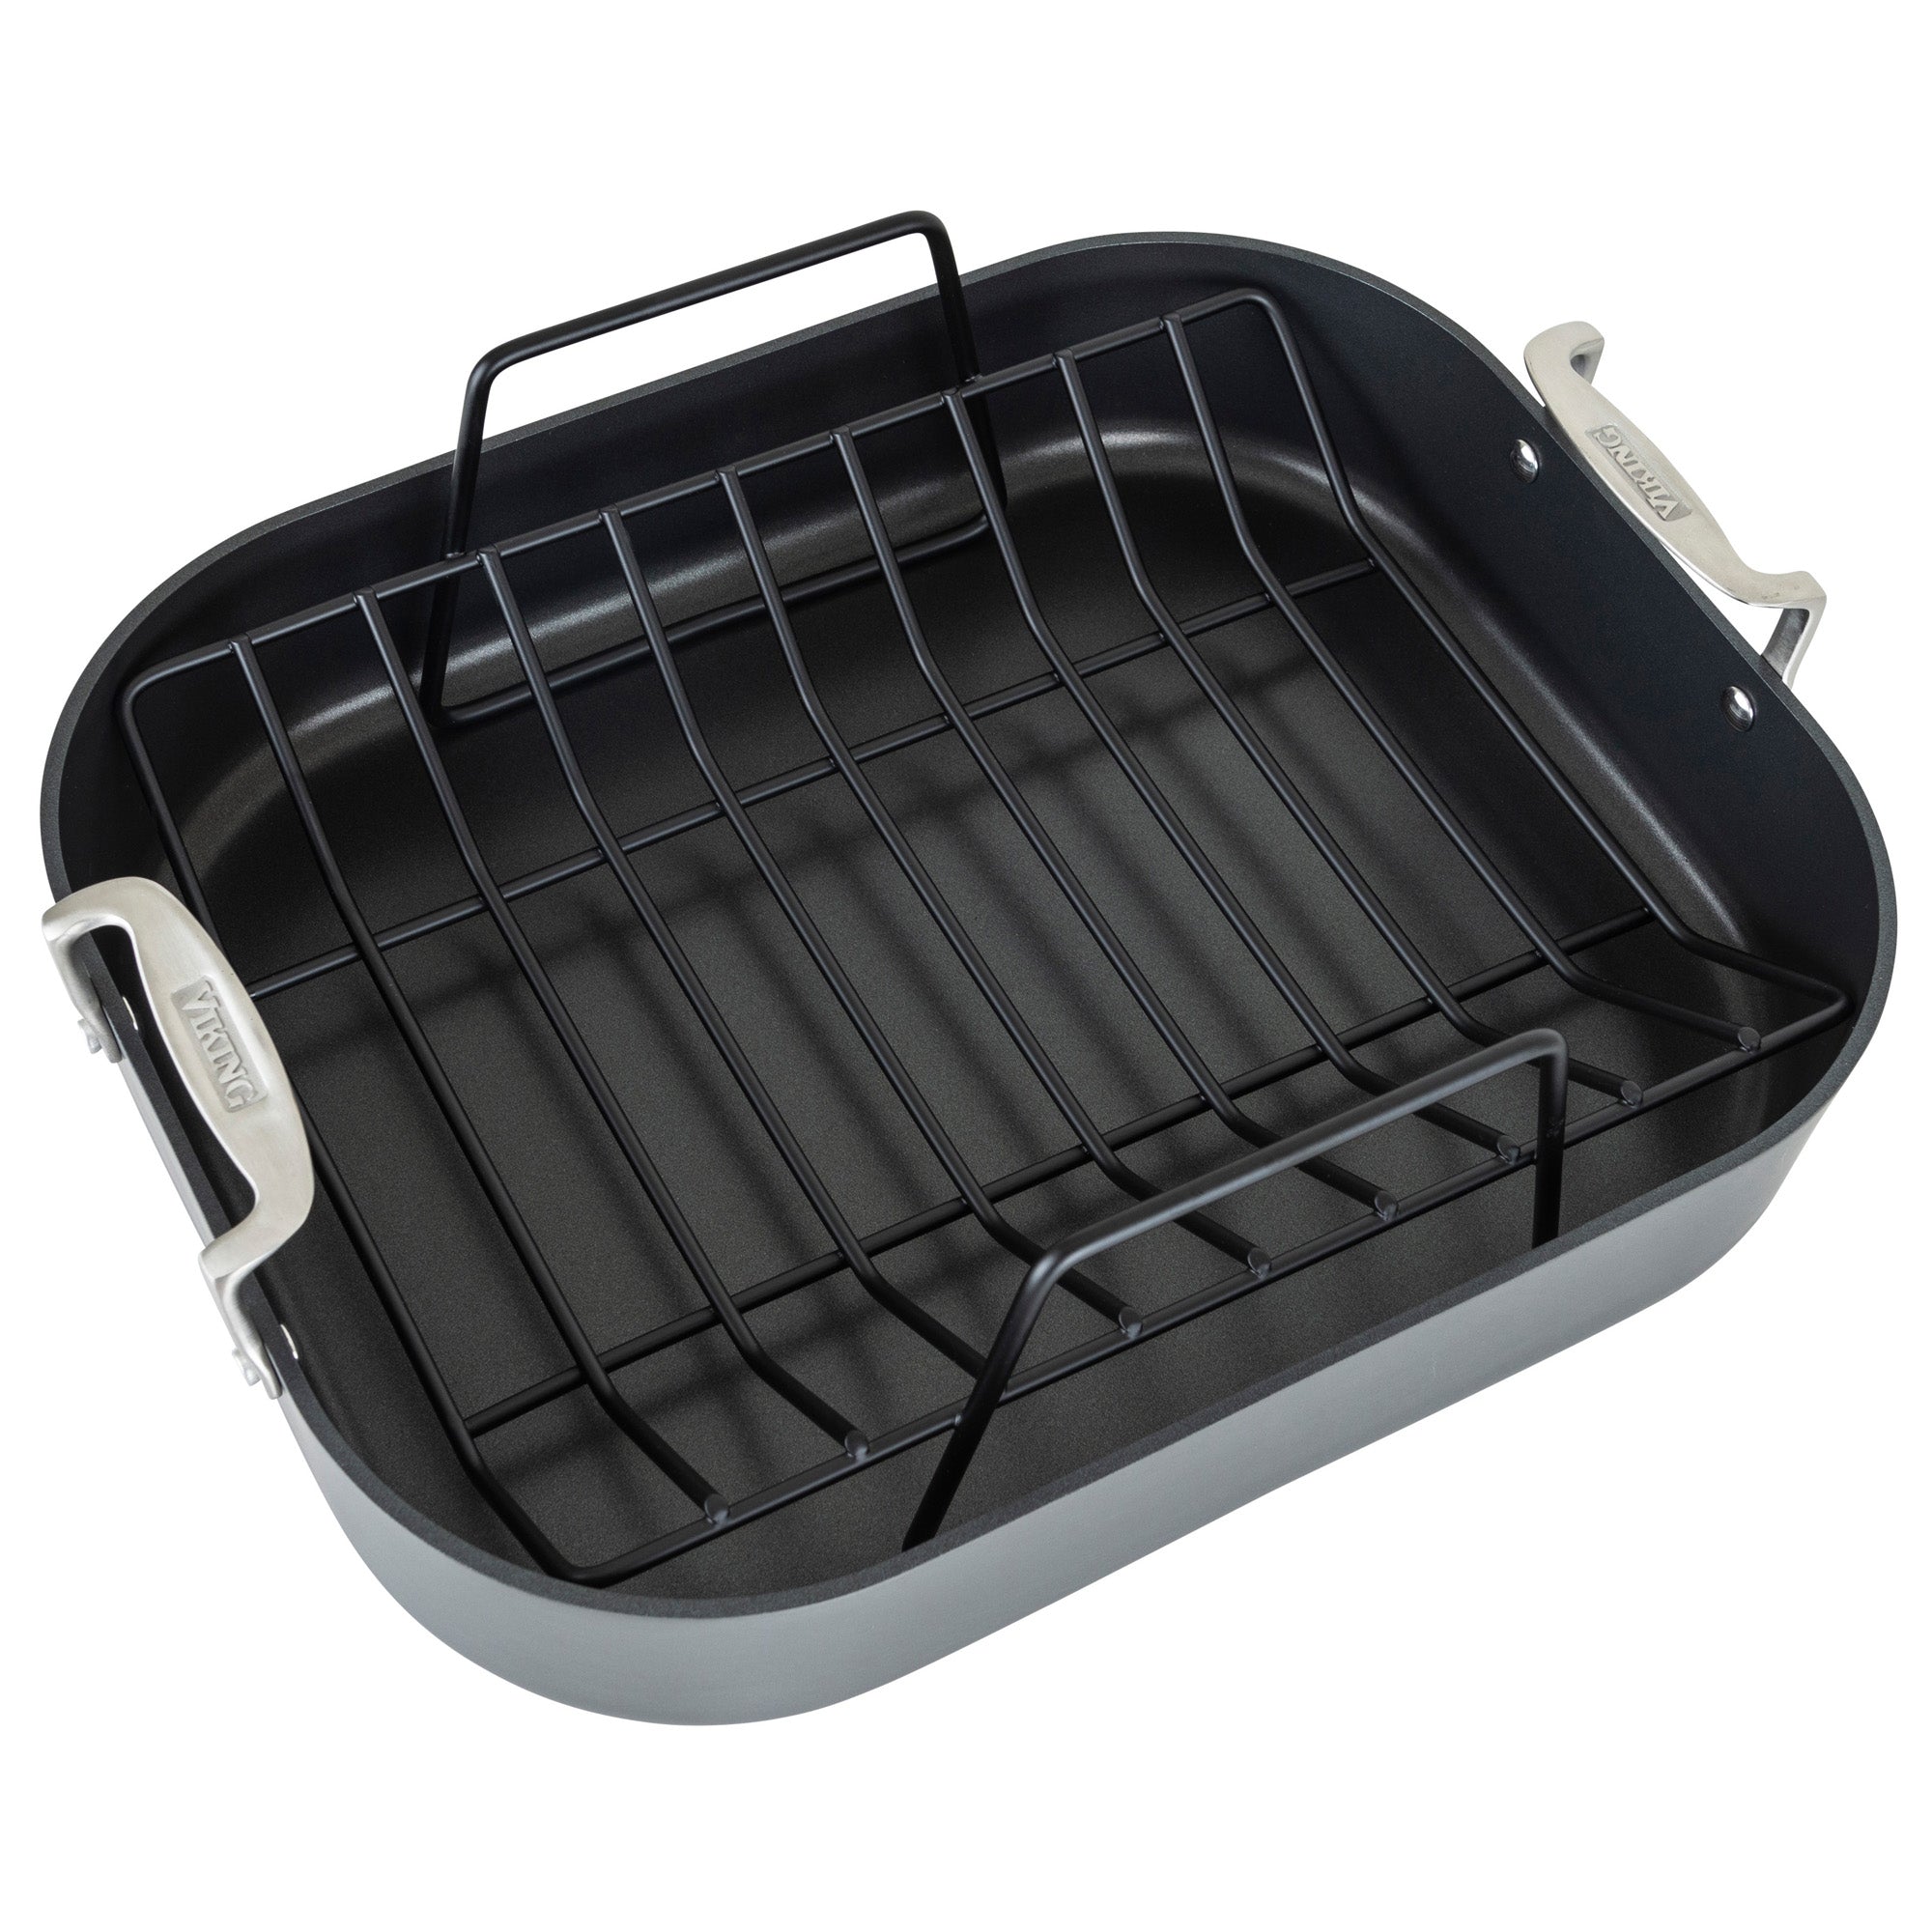 Viking Hard Anodized Nonstick Roaster with Rack and Bonus Carving Set